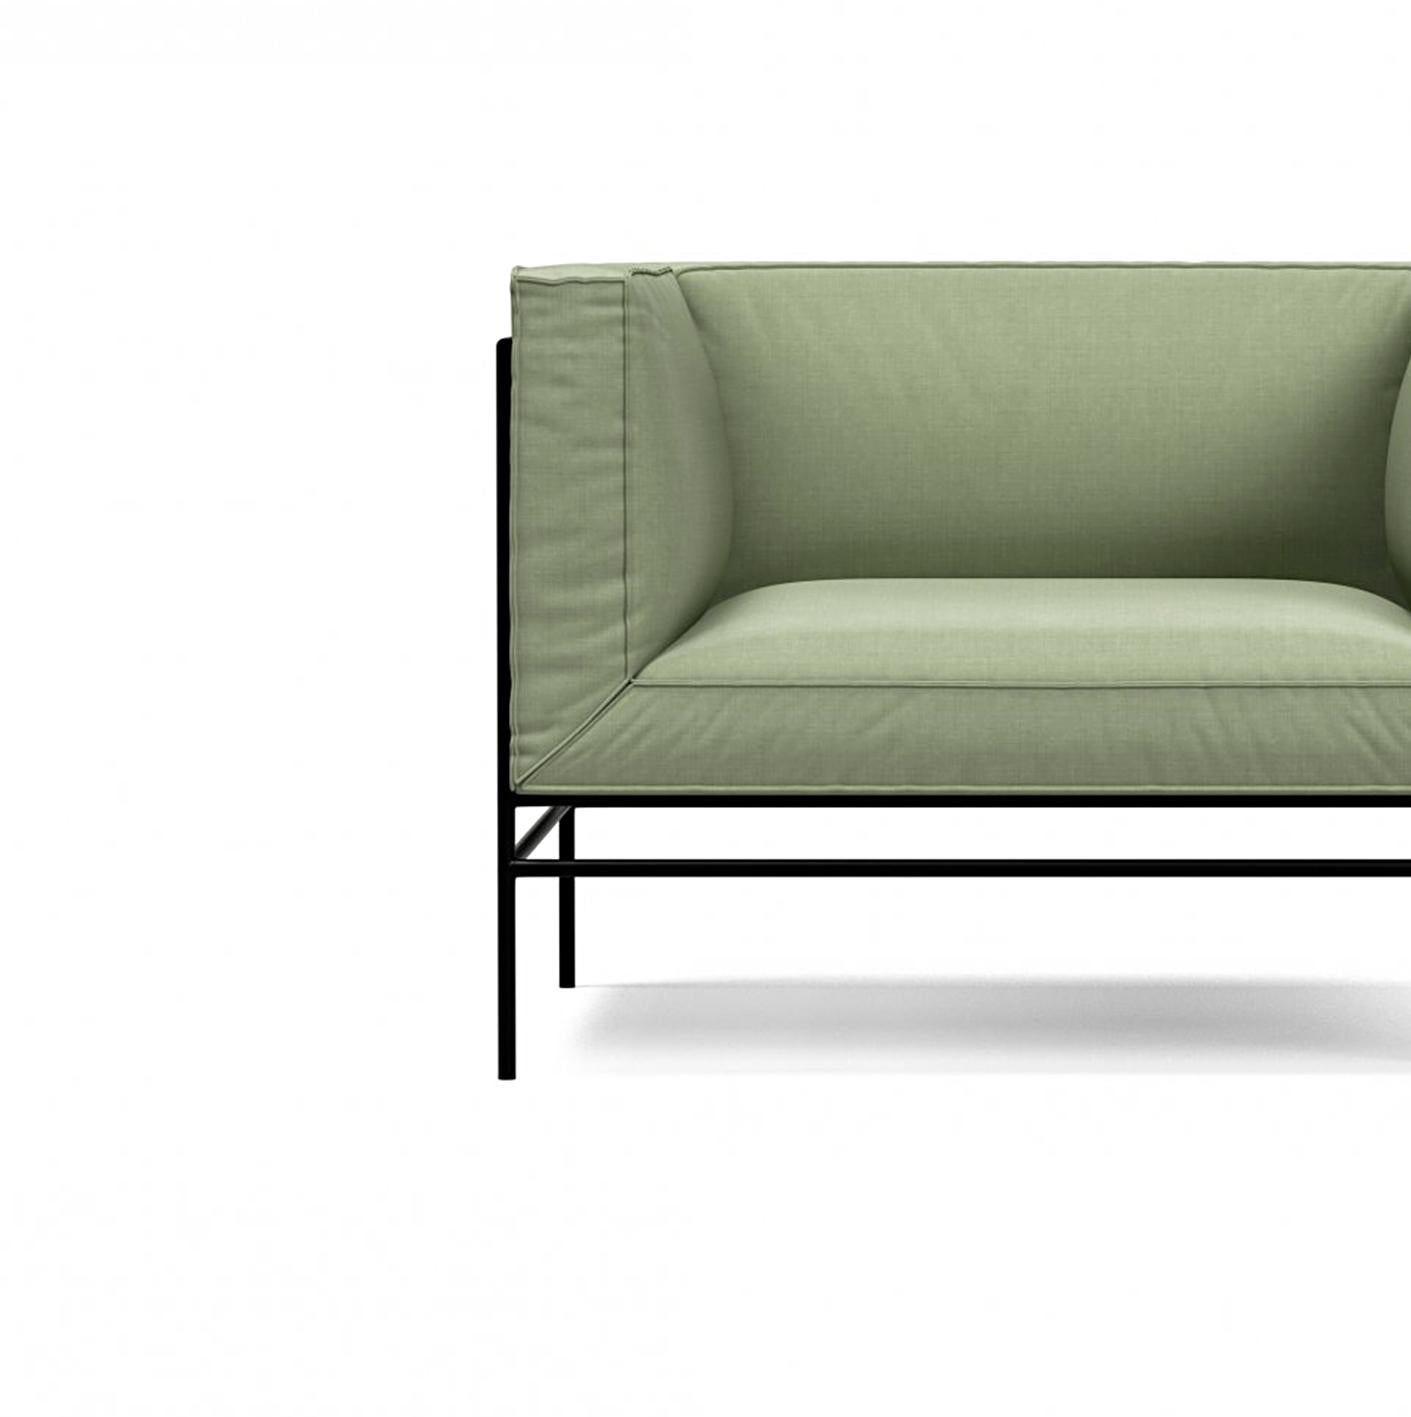 'Middleweight' armchair by Michael Anastassiades for Karakter

Middleweight is Michael Anastassiades’ very first upholstered piece of furniture. The piece captures the best of two worlds, the Italian super lounge sofa on one side and the compact